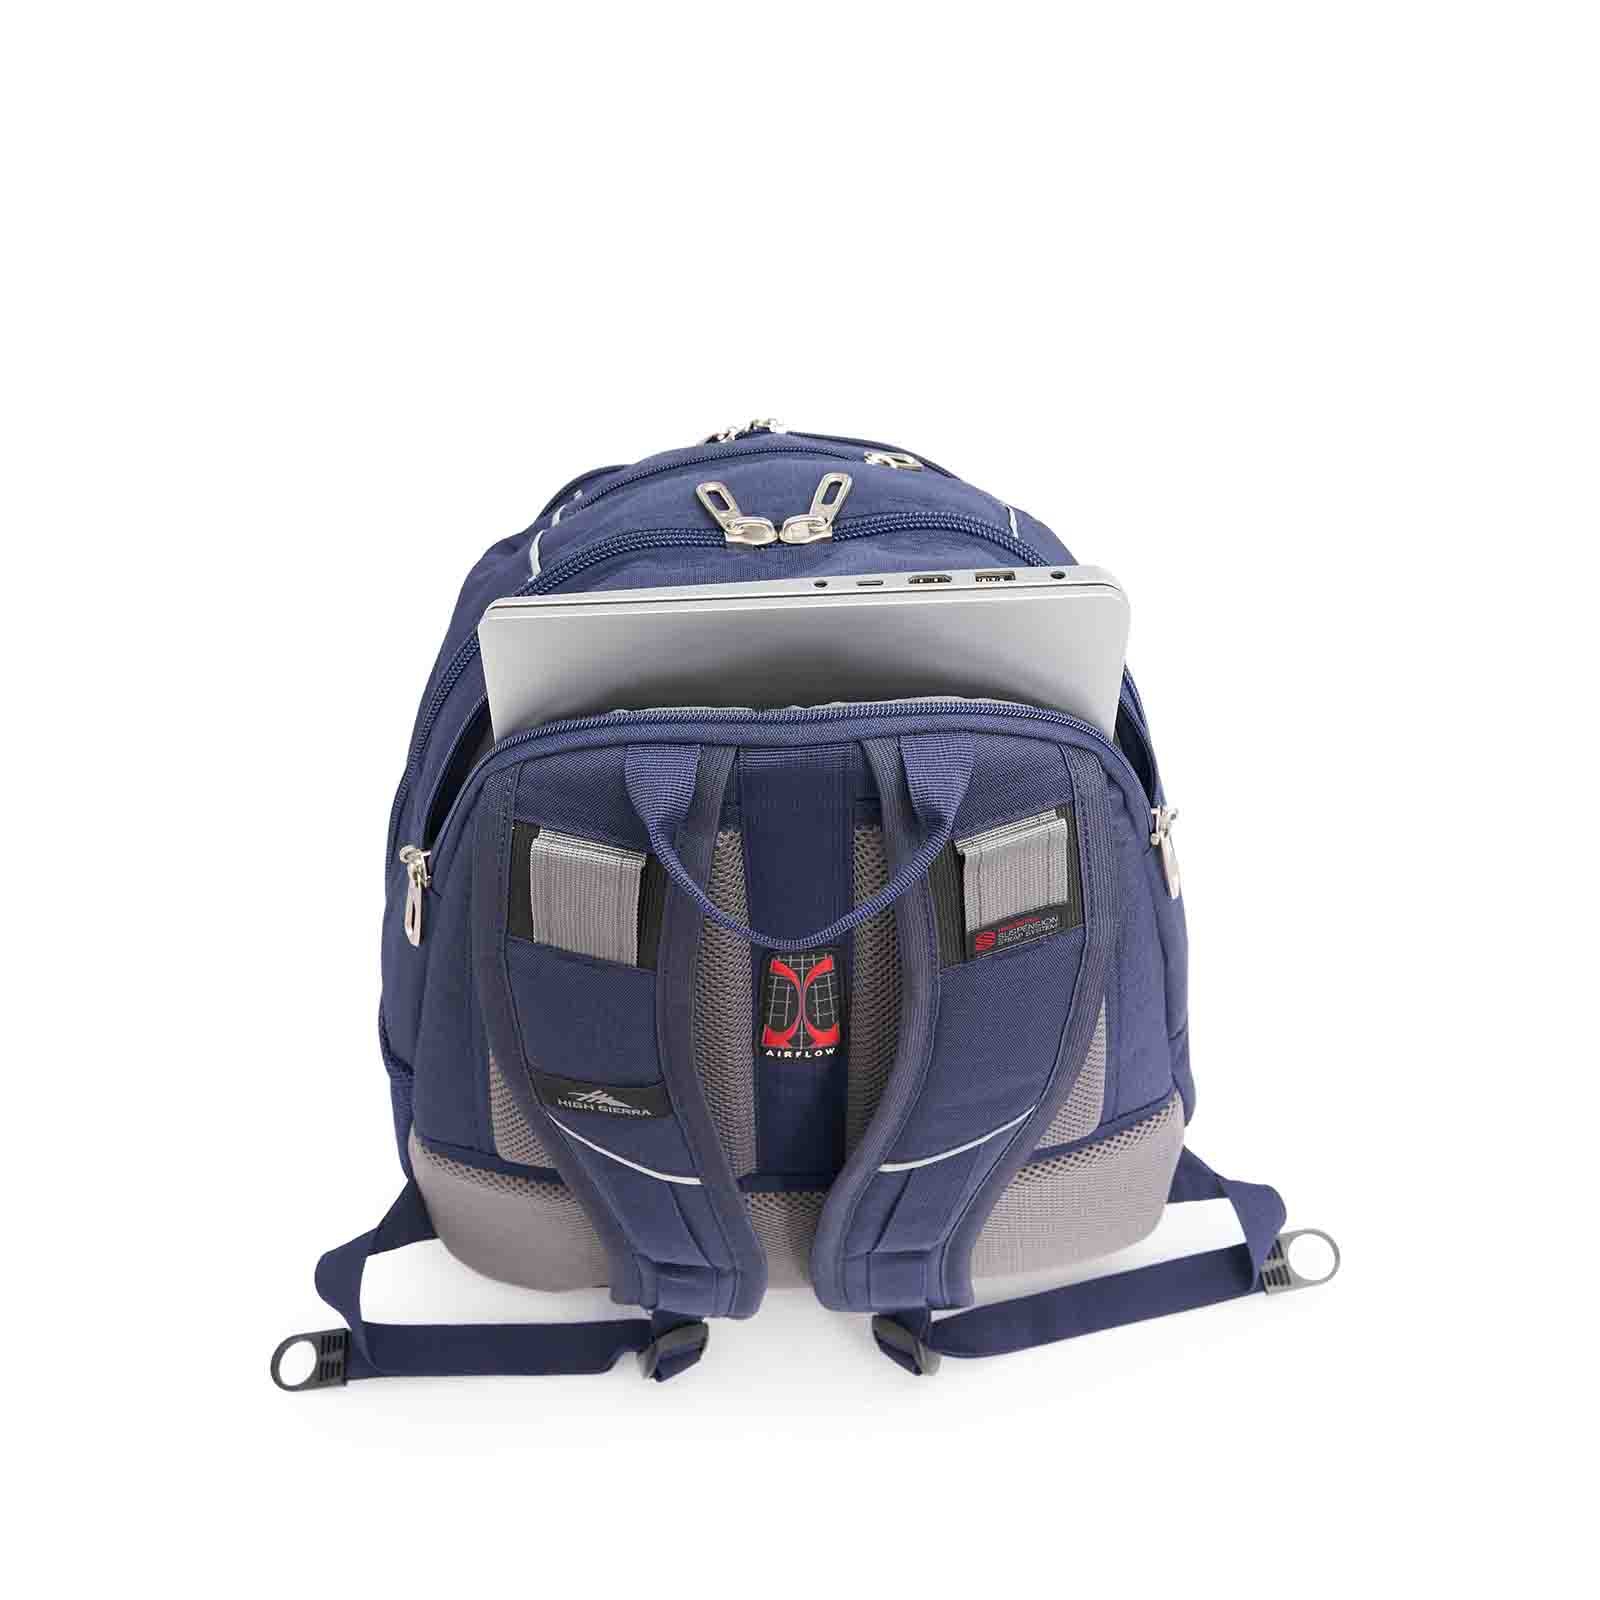 High-Sierra-Academy-3-Eco-15-Inch-Laptop-Backpack-Marine-Blue-Laptop-Pouch